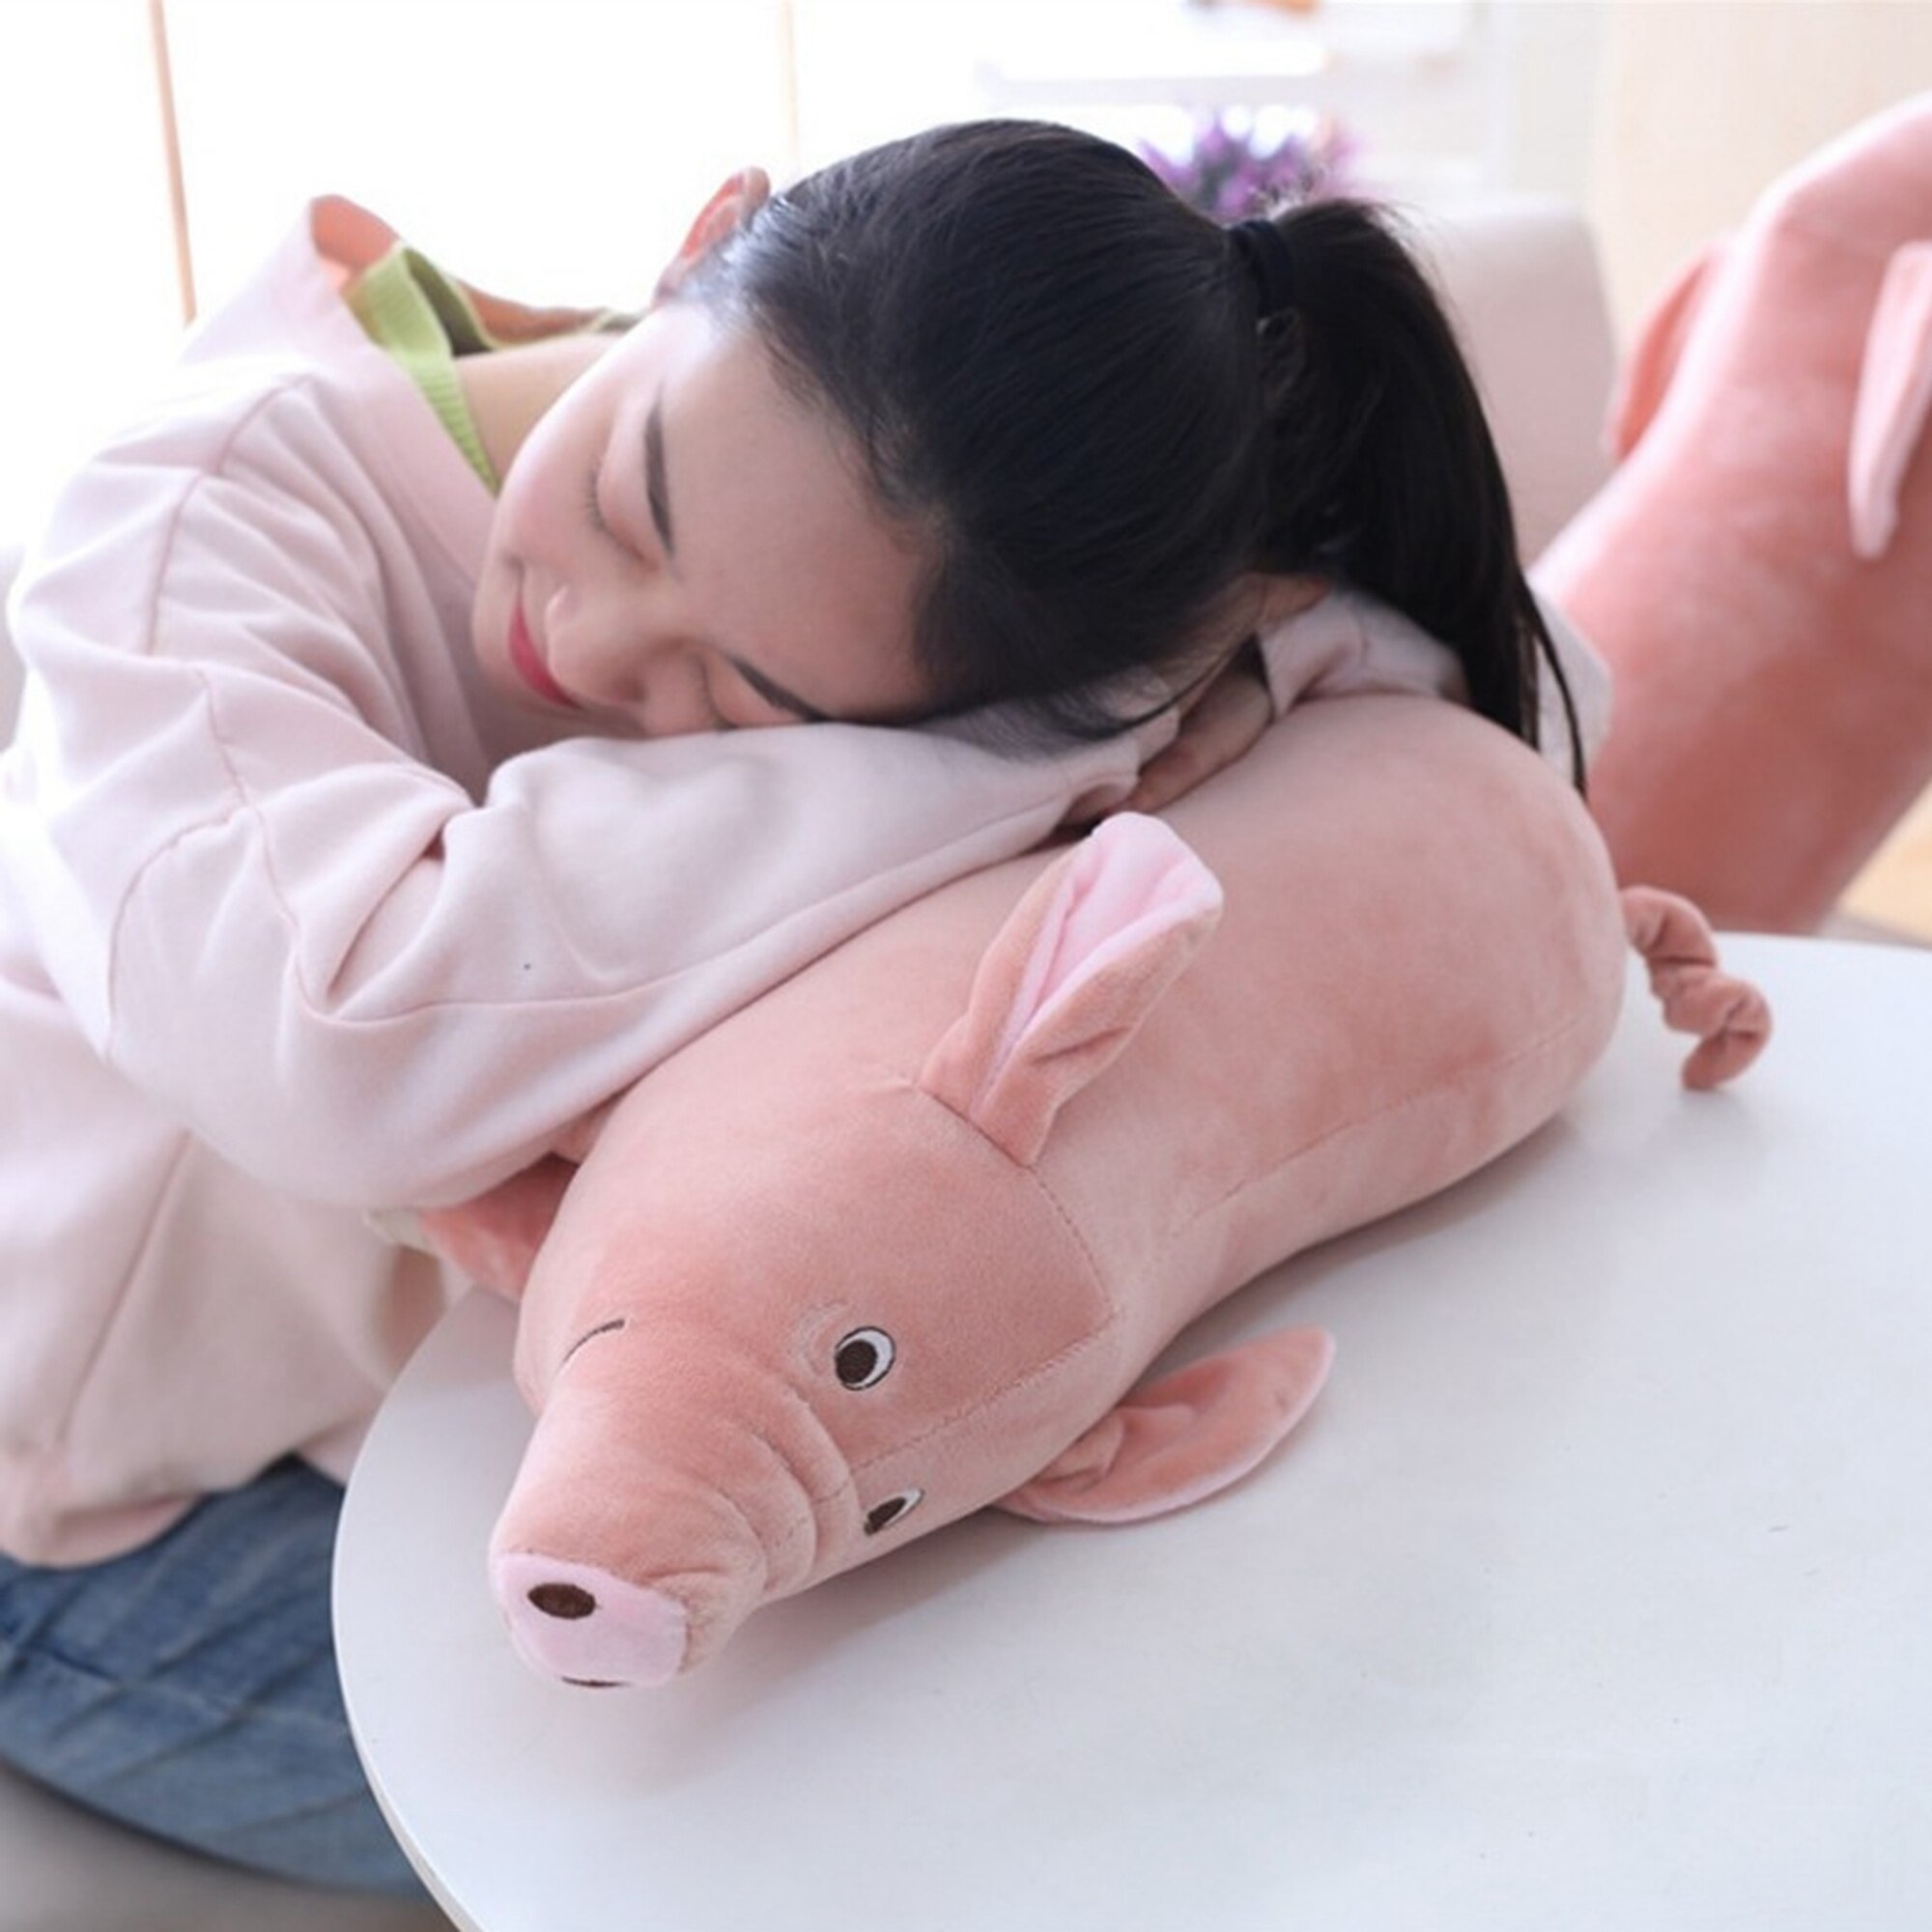 New 25CM Plush Toys Cartoon Pig Shaped Doll Throw Pillow Stuffed Toys Nice Gift For Kids 2